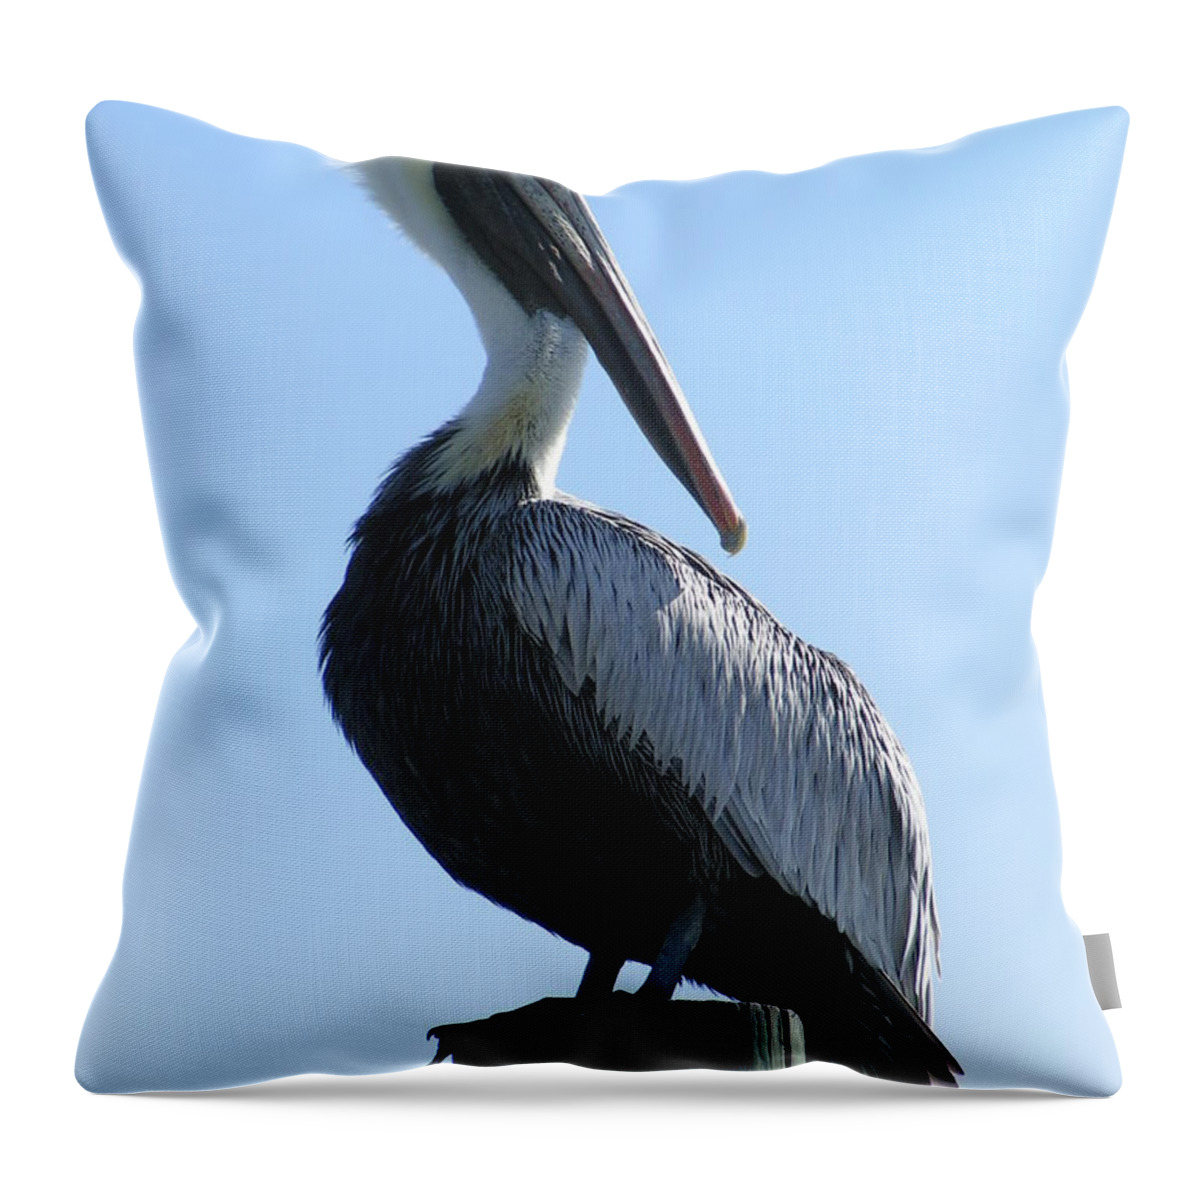  Throw Pillow featuring the photograph Pelican Roost by Heather E Harman